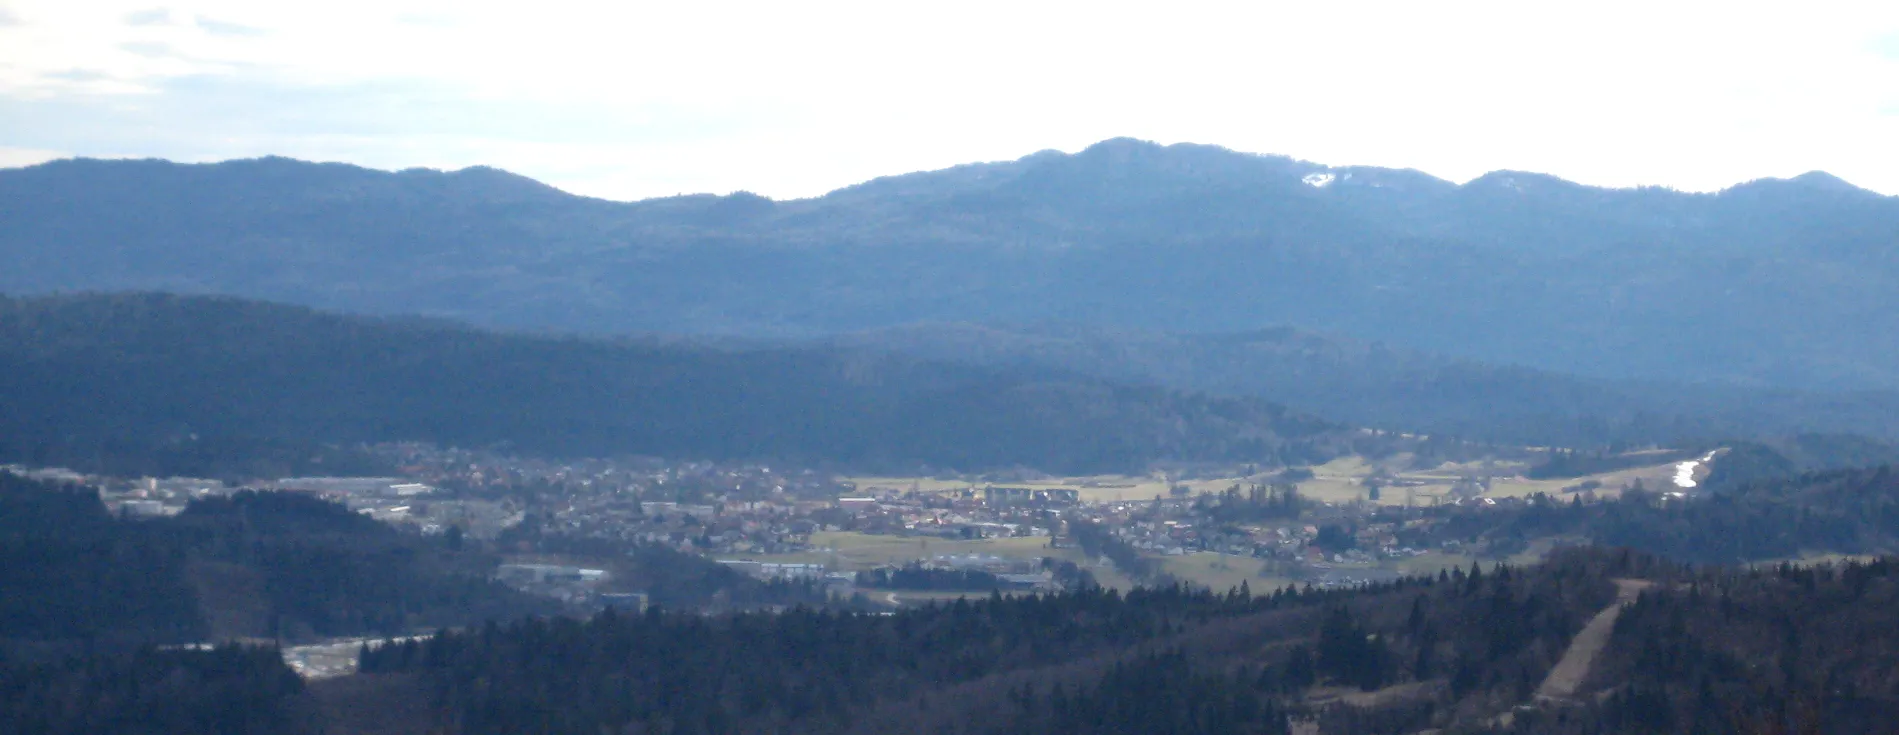 Photo showing: Logatec, town in Slovenia